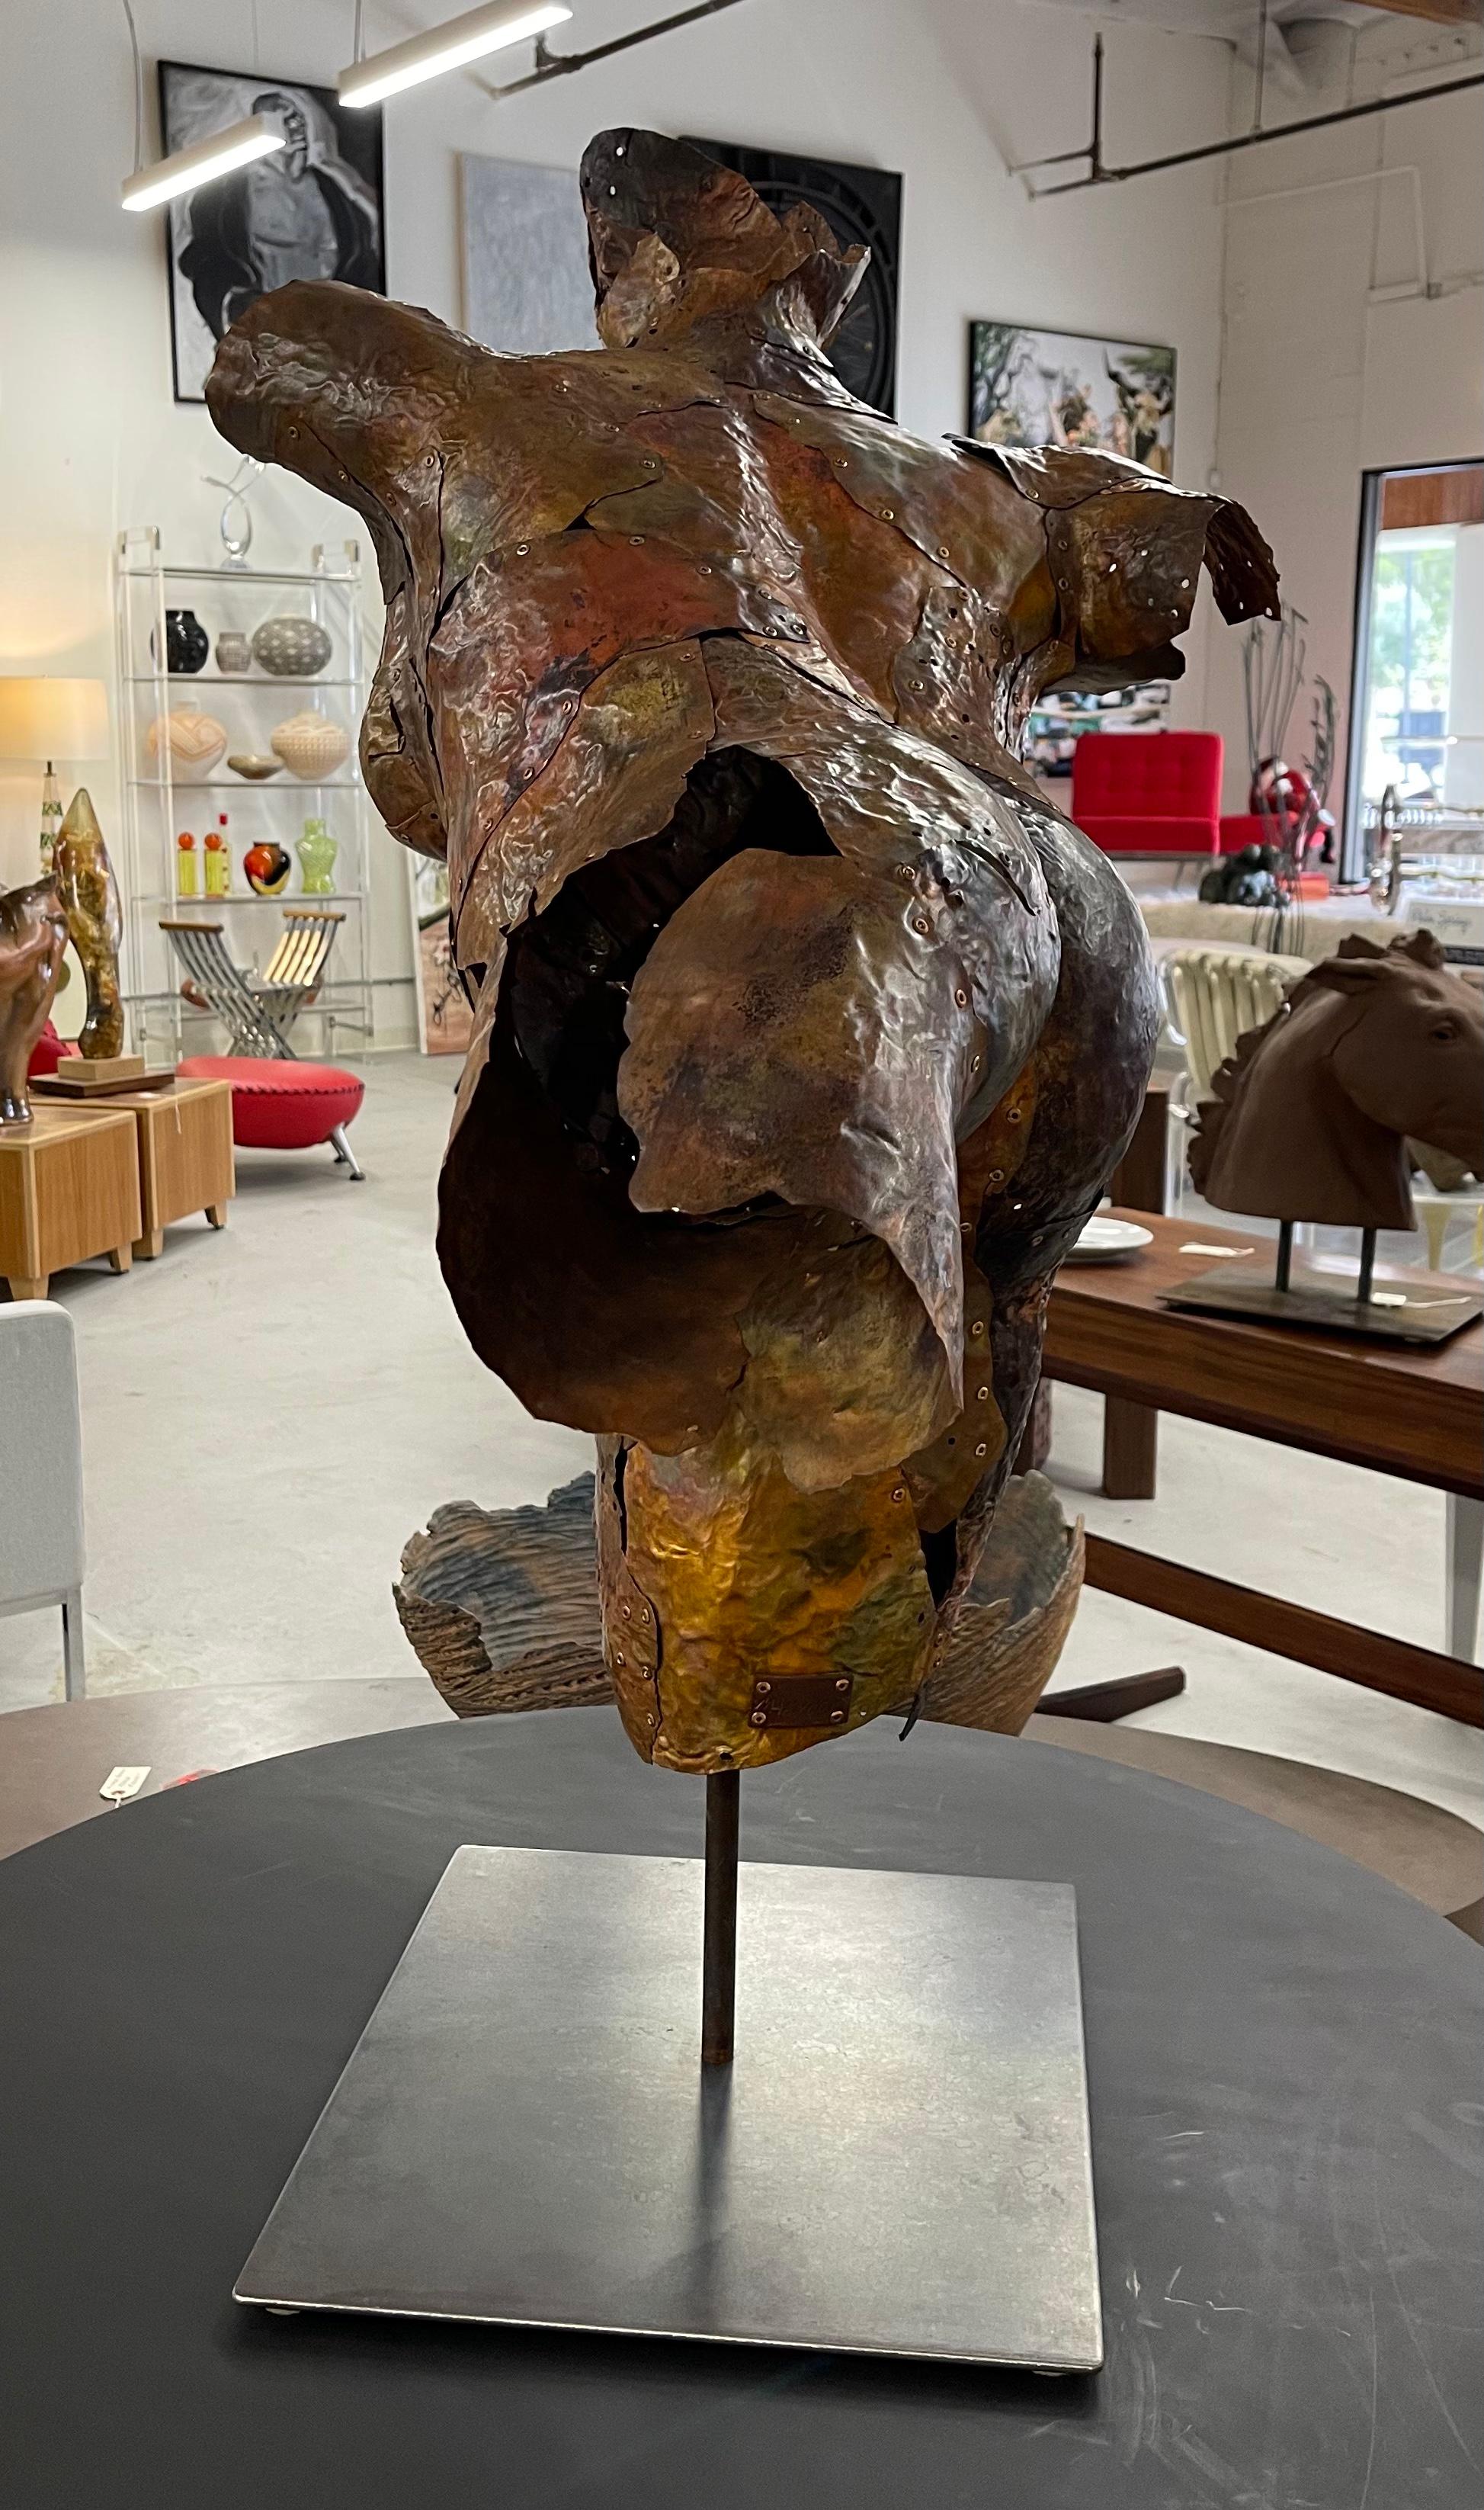 Stunning copper sculpture by the noted Central Coast artist Michael Hannon. Graceful and moving the sculpture is titled “Athena” and bears a plaque with the artist’s name. The sculpture is mounted on a iron base and rotates. Please be sure and have